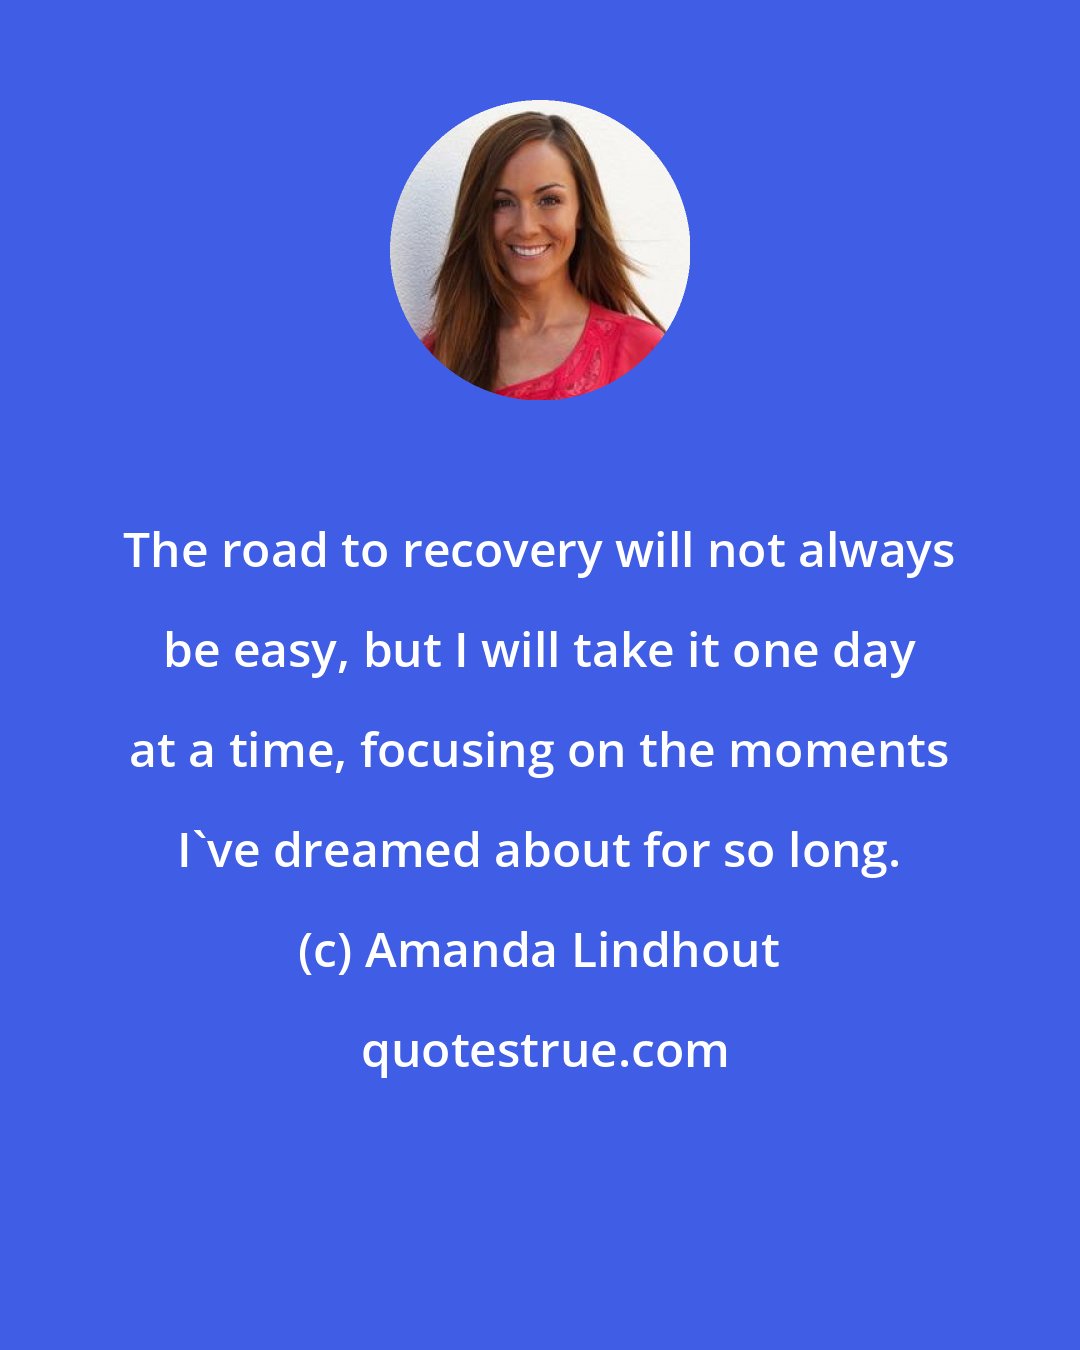 Amanda Lindhout: The road to recovery will not always be easy, but I will take it one day at a time, focusing on the moments I've dreamed about for so long.